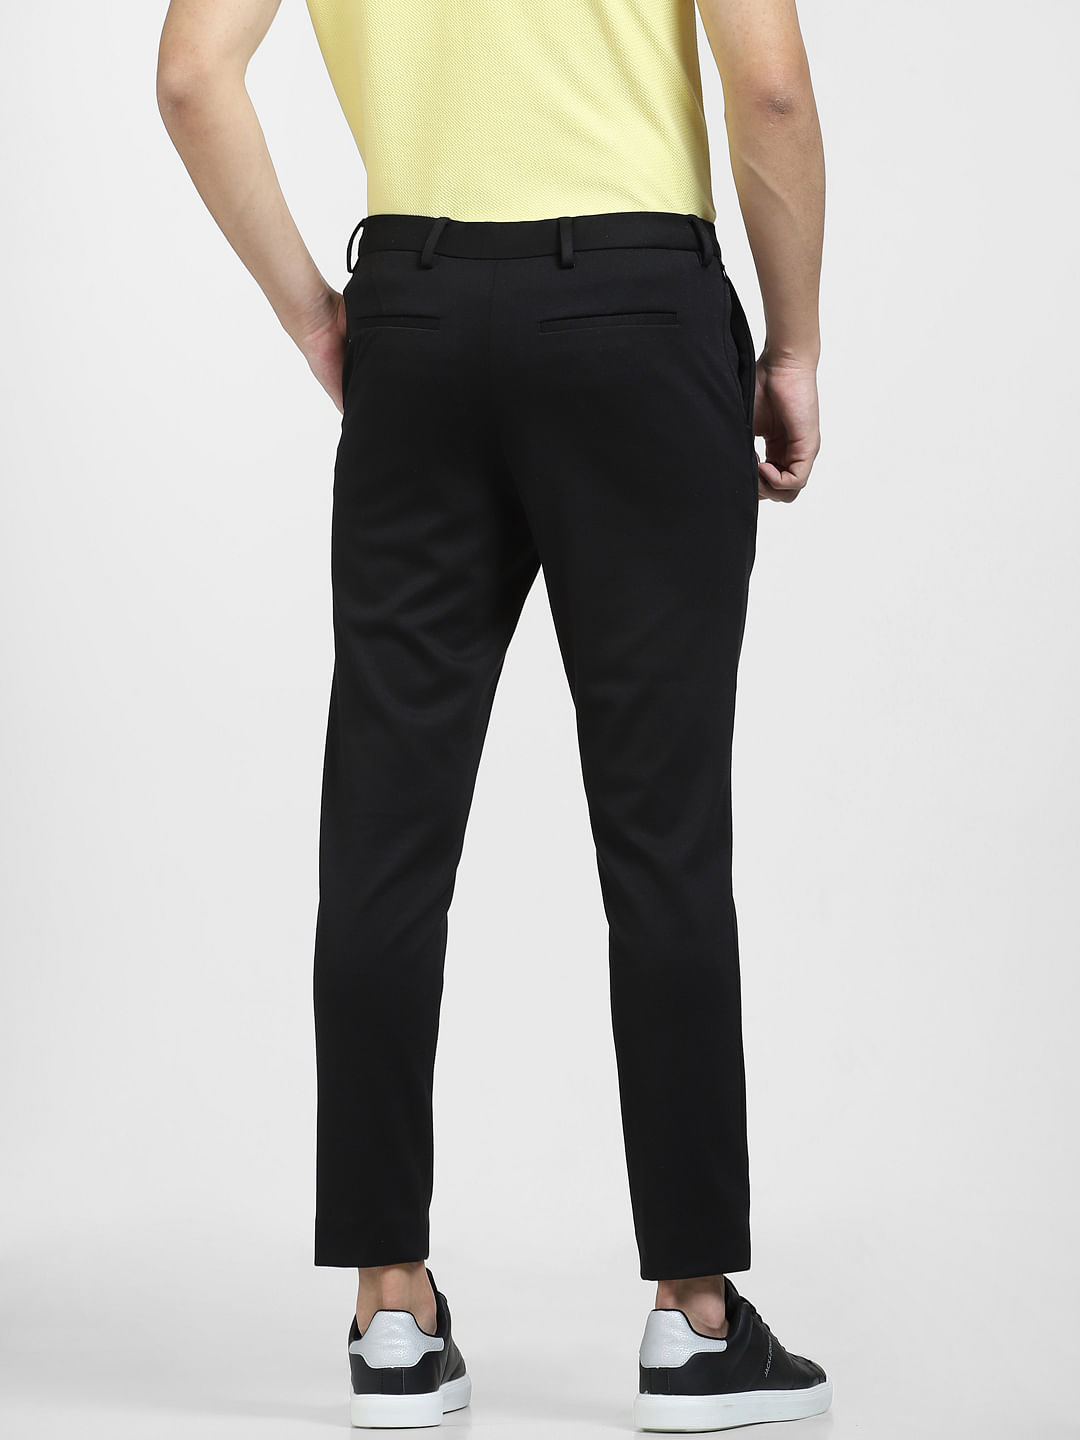 Buy Louis Philippe Black Trousers Online  763406  Louis Philippe